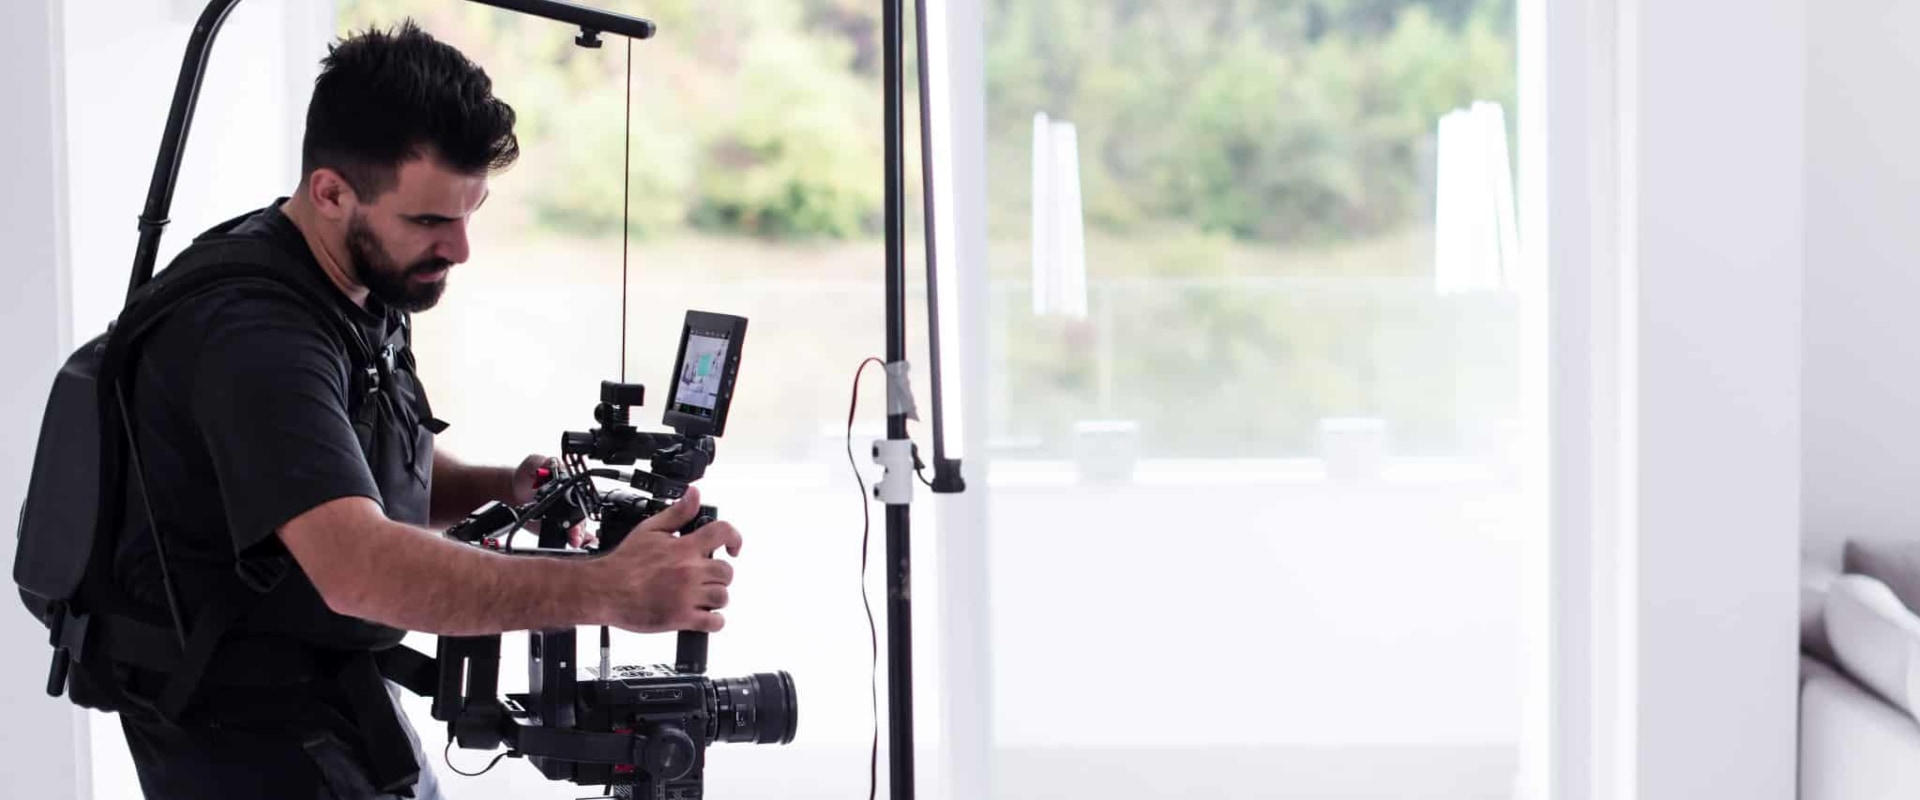 Video Production Services: A Complete Overview